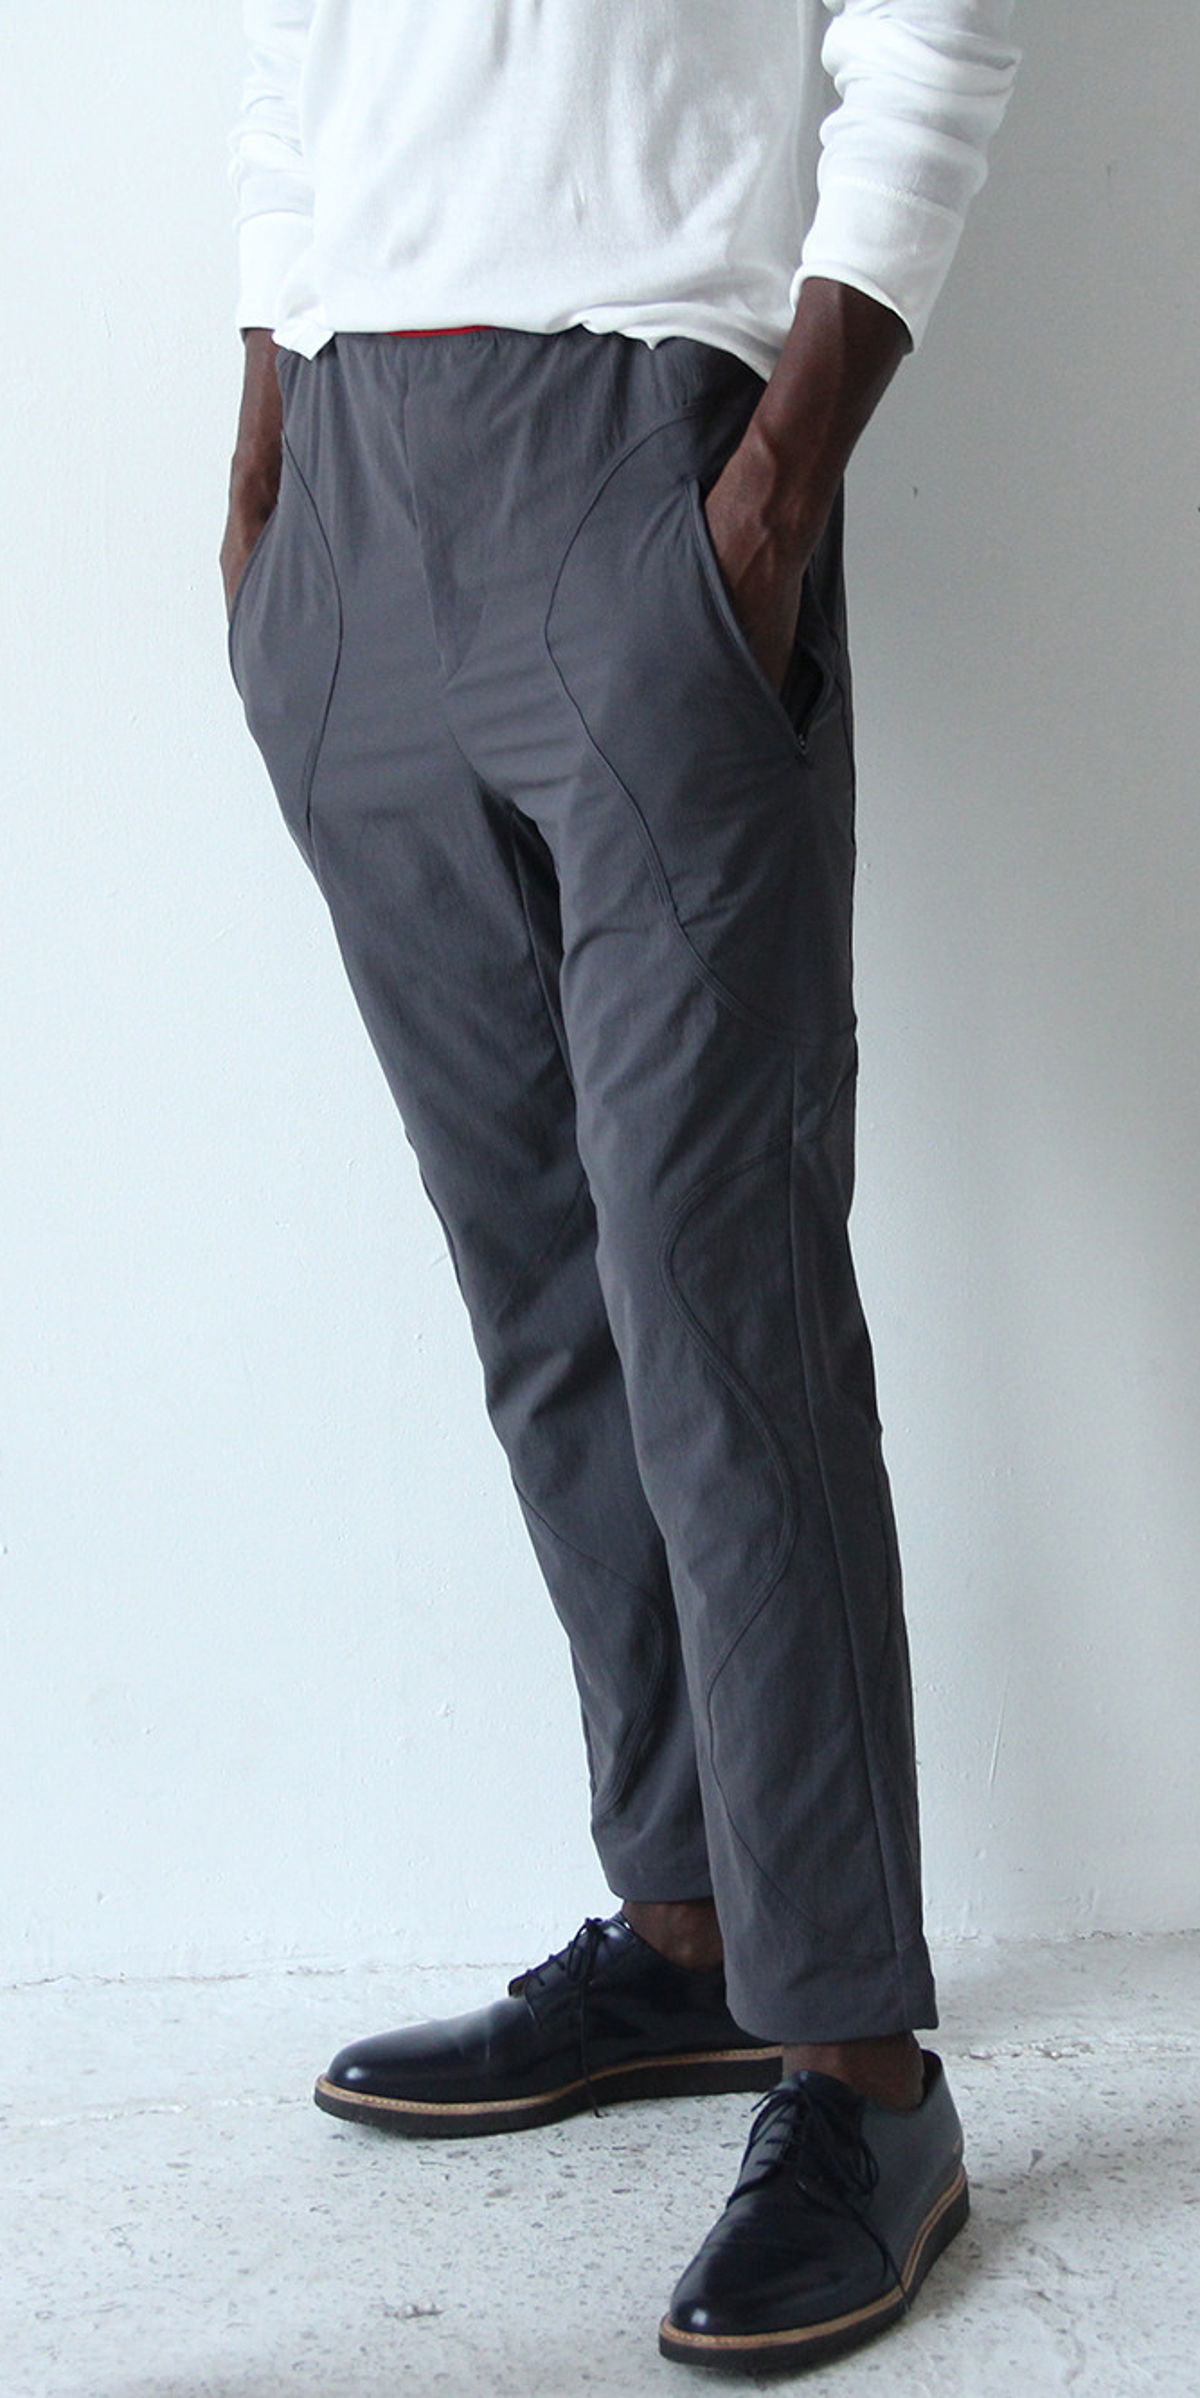 DISCREET DISCOVERER – TEXTURED UTILITY TRAVEL PANT